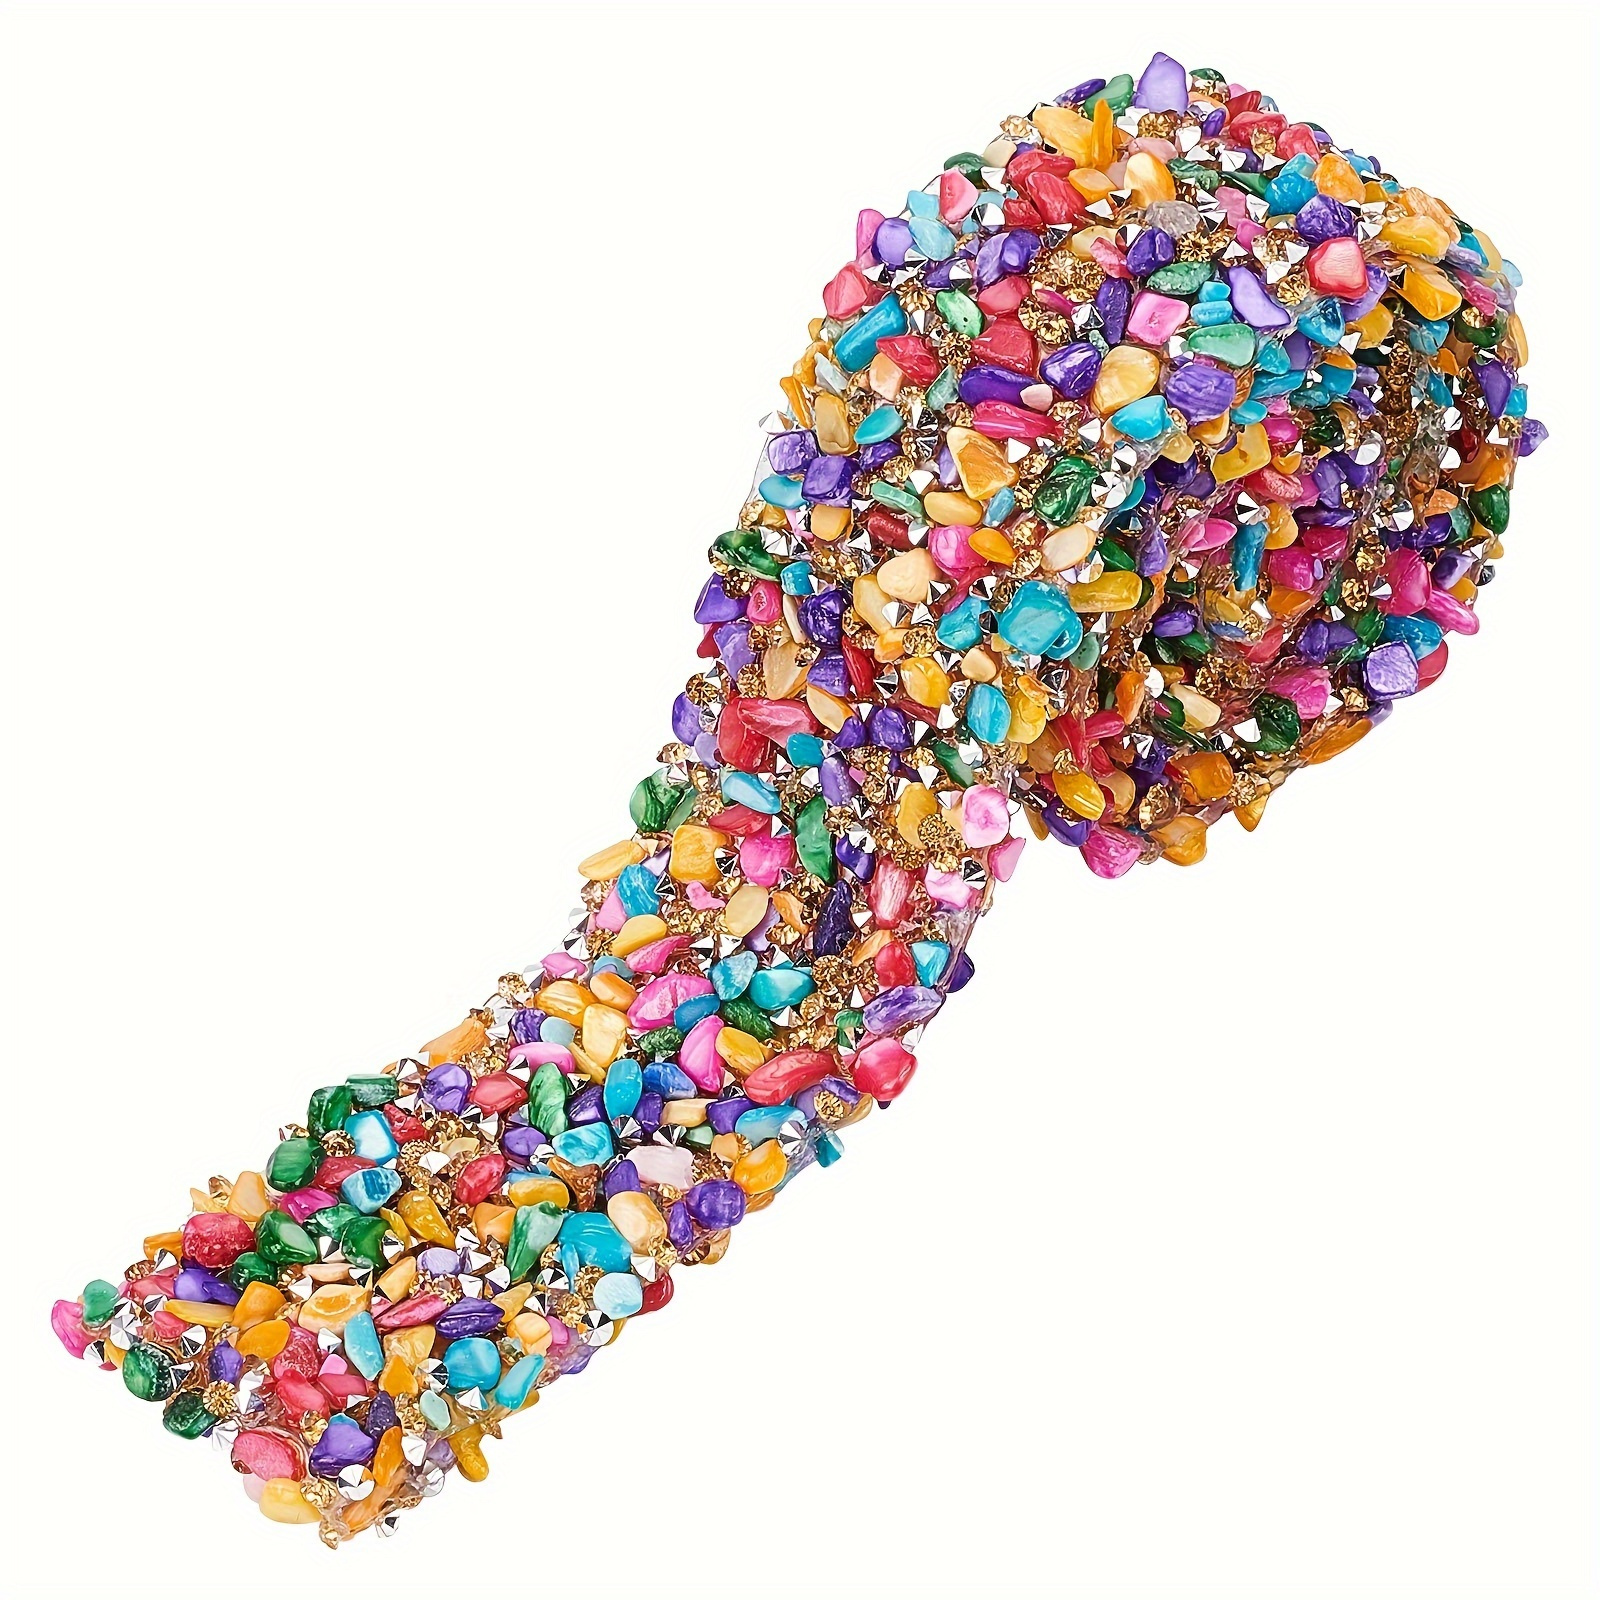 

2m Long Mixed Color Rhinestone Ribbon Trim, Glass Crystal Rhinestone Chain For Diy Fashion Clothing, Shoes, Bags, And Packaging Decoration